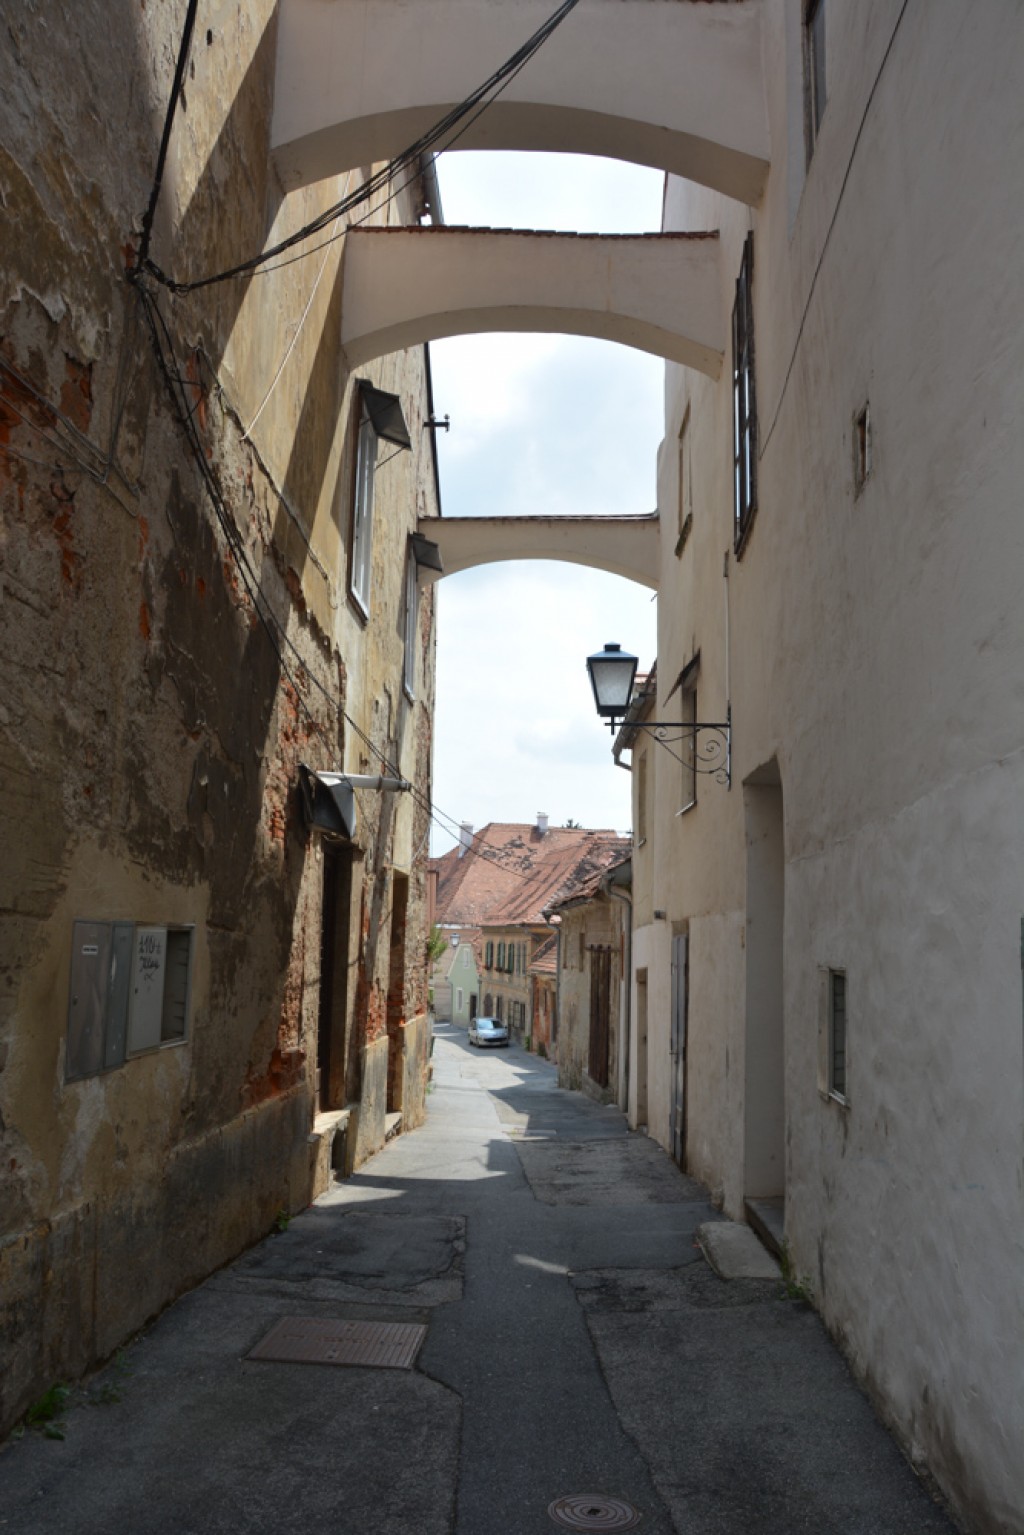 Ptuj is the oldest town in Slovenia and we really enjoyed wandering around the castle and the old city streets.  Lots of beautiful color architecture.